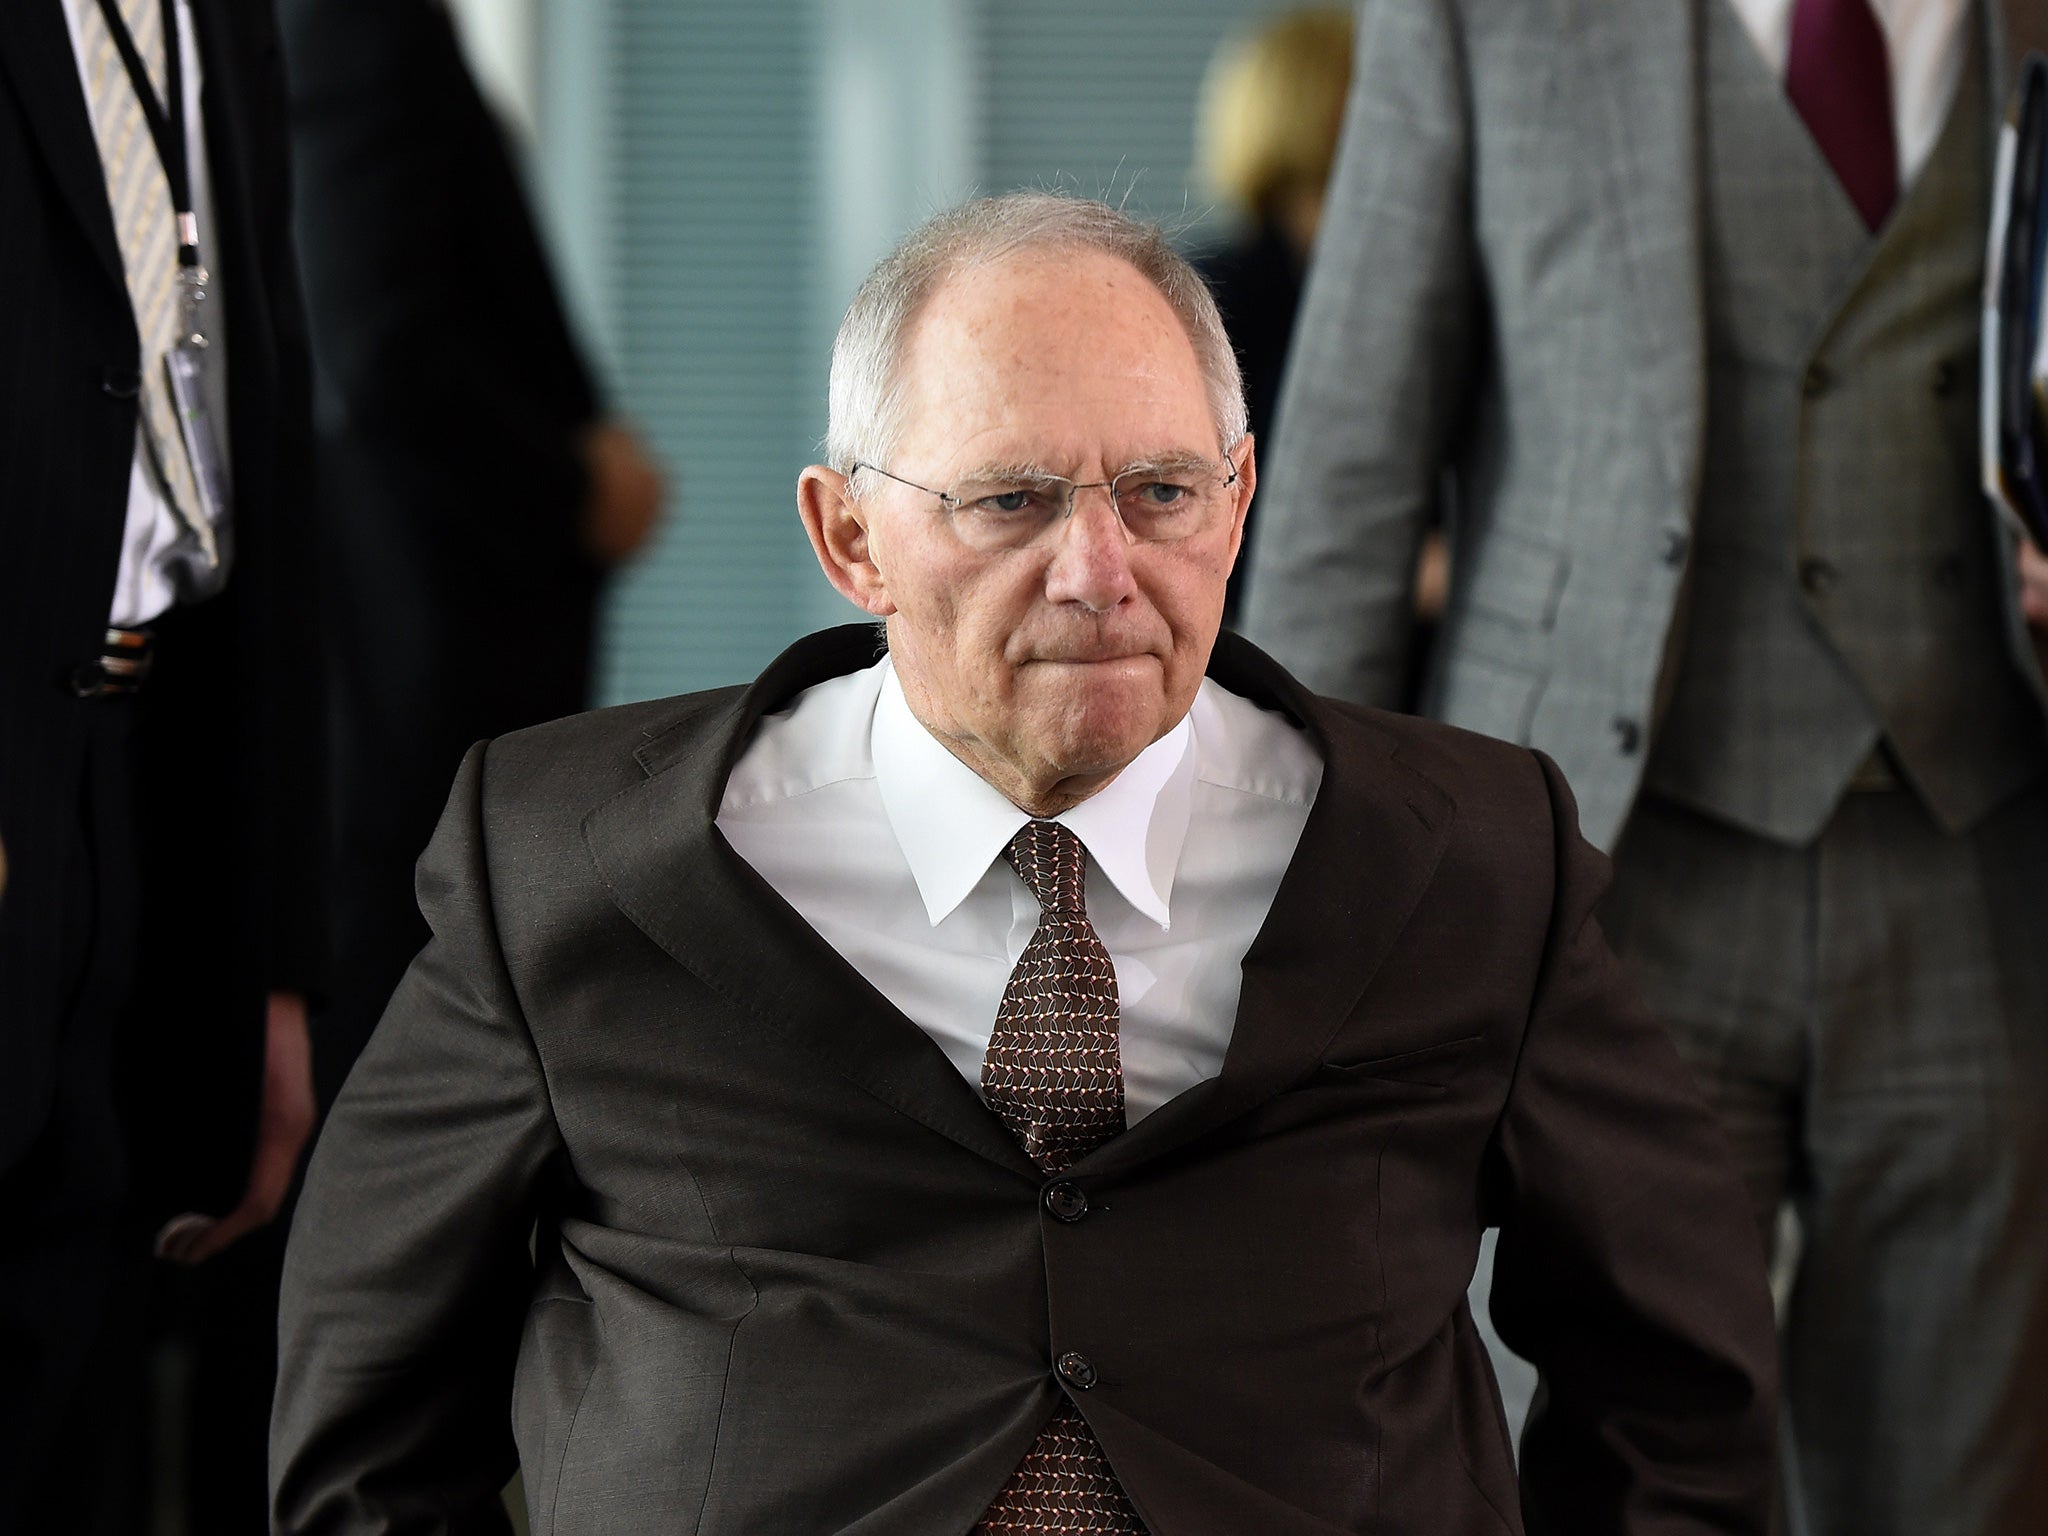 Wolfgang Schäuble said the decision lay with Greece and remained an uncertainty